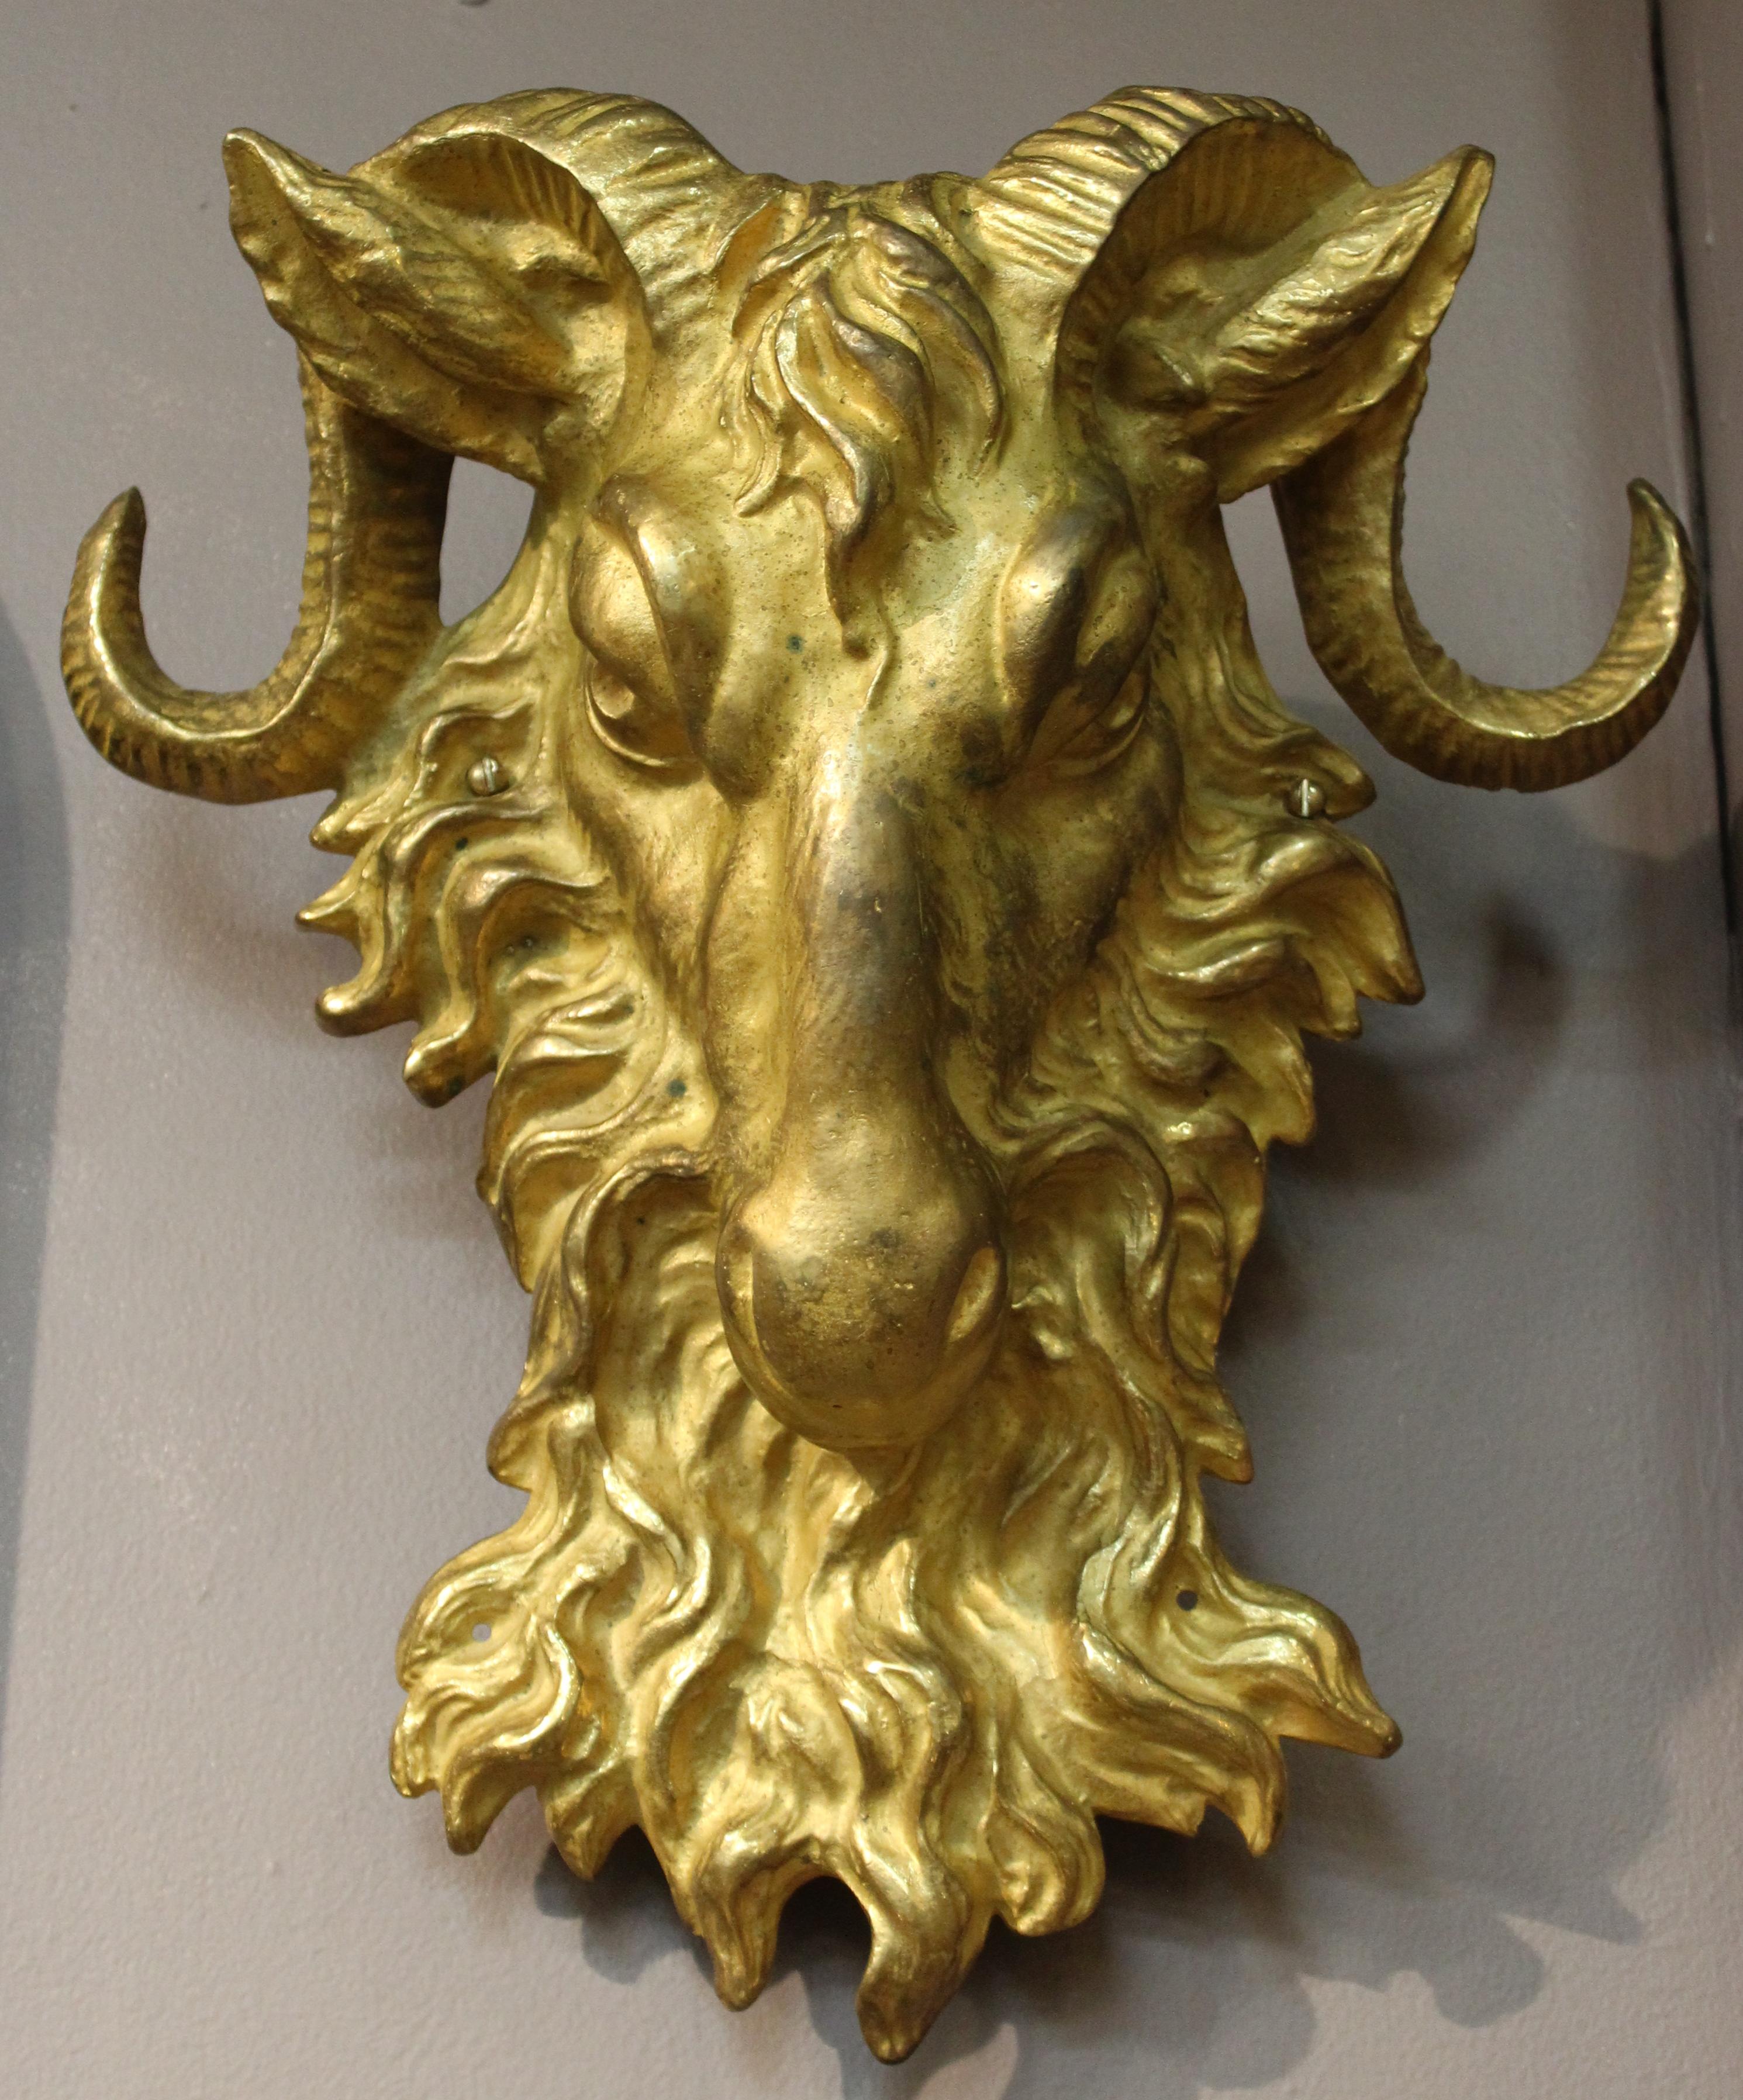 American gilded age neoclassical Revival pair of sconces made from horned ram heads, probably re-purposed from former decorative facade metal elements. The pair is in gilt bronze and can be easily mounted to a wall as sconces or be use as decorative